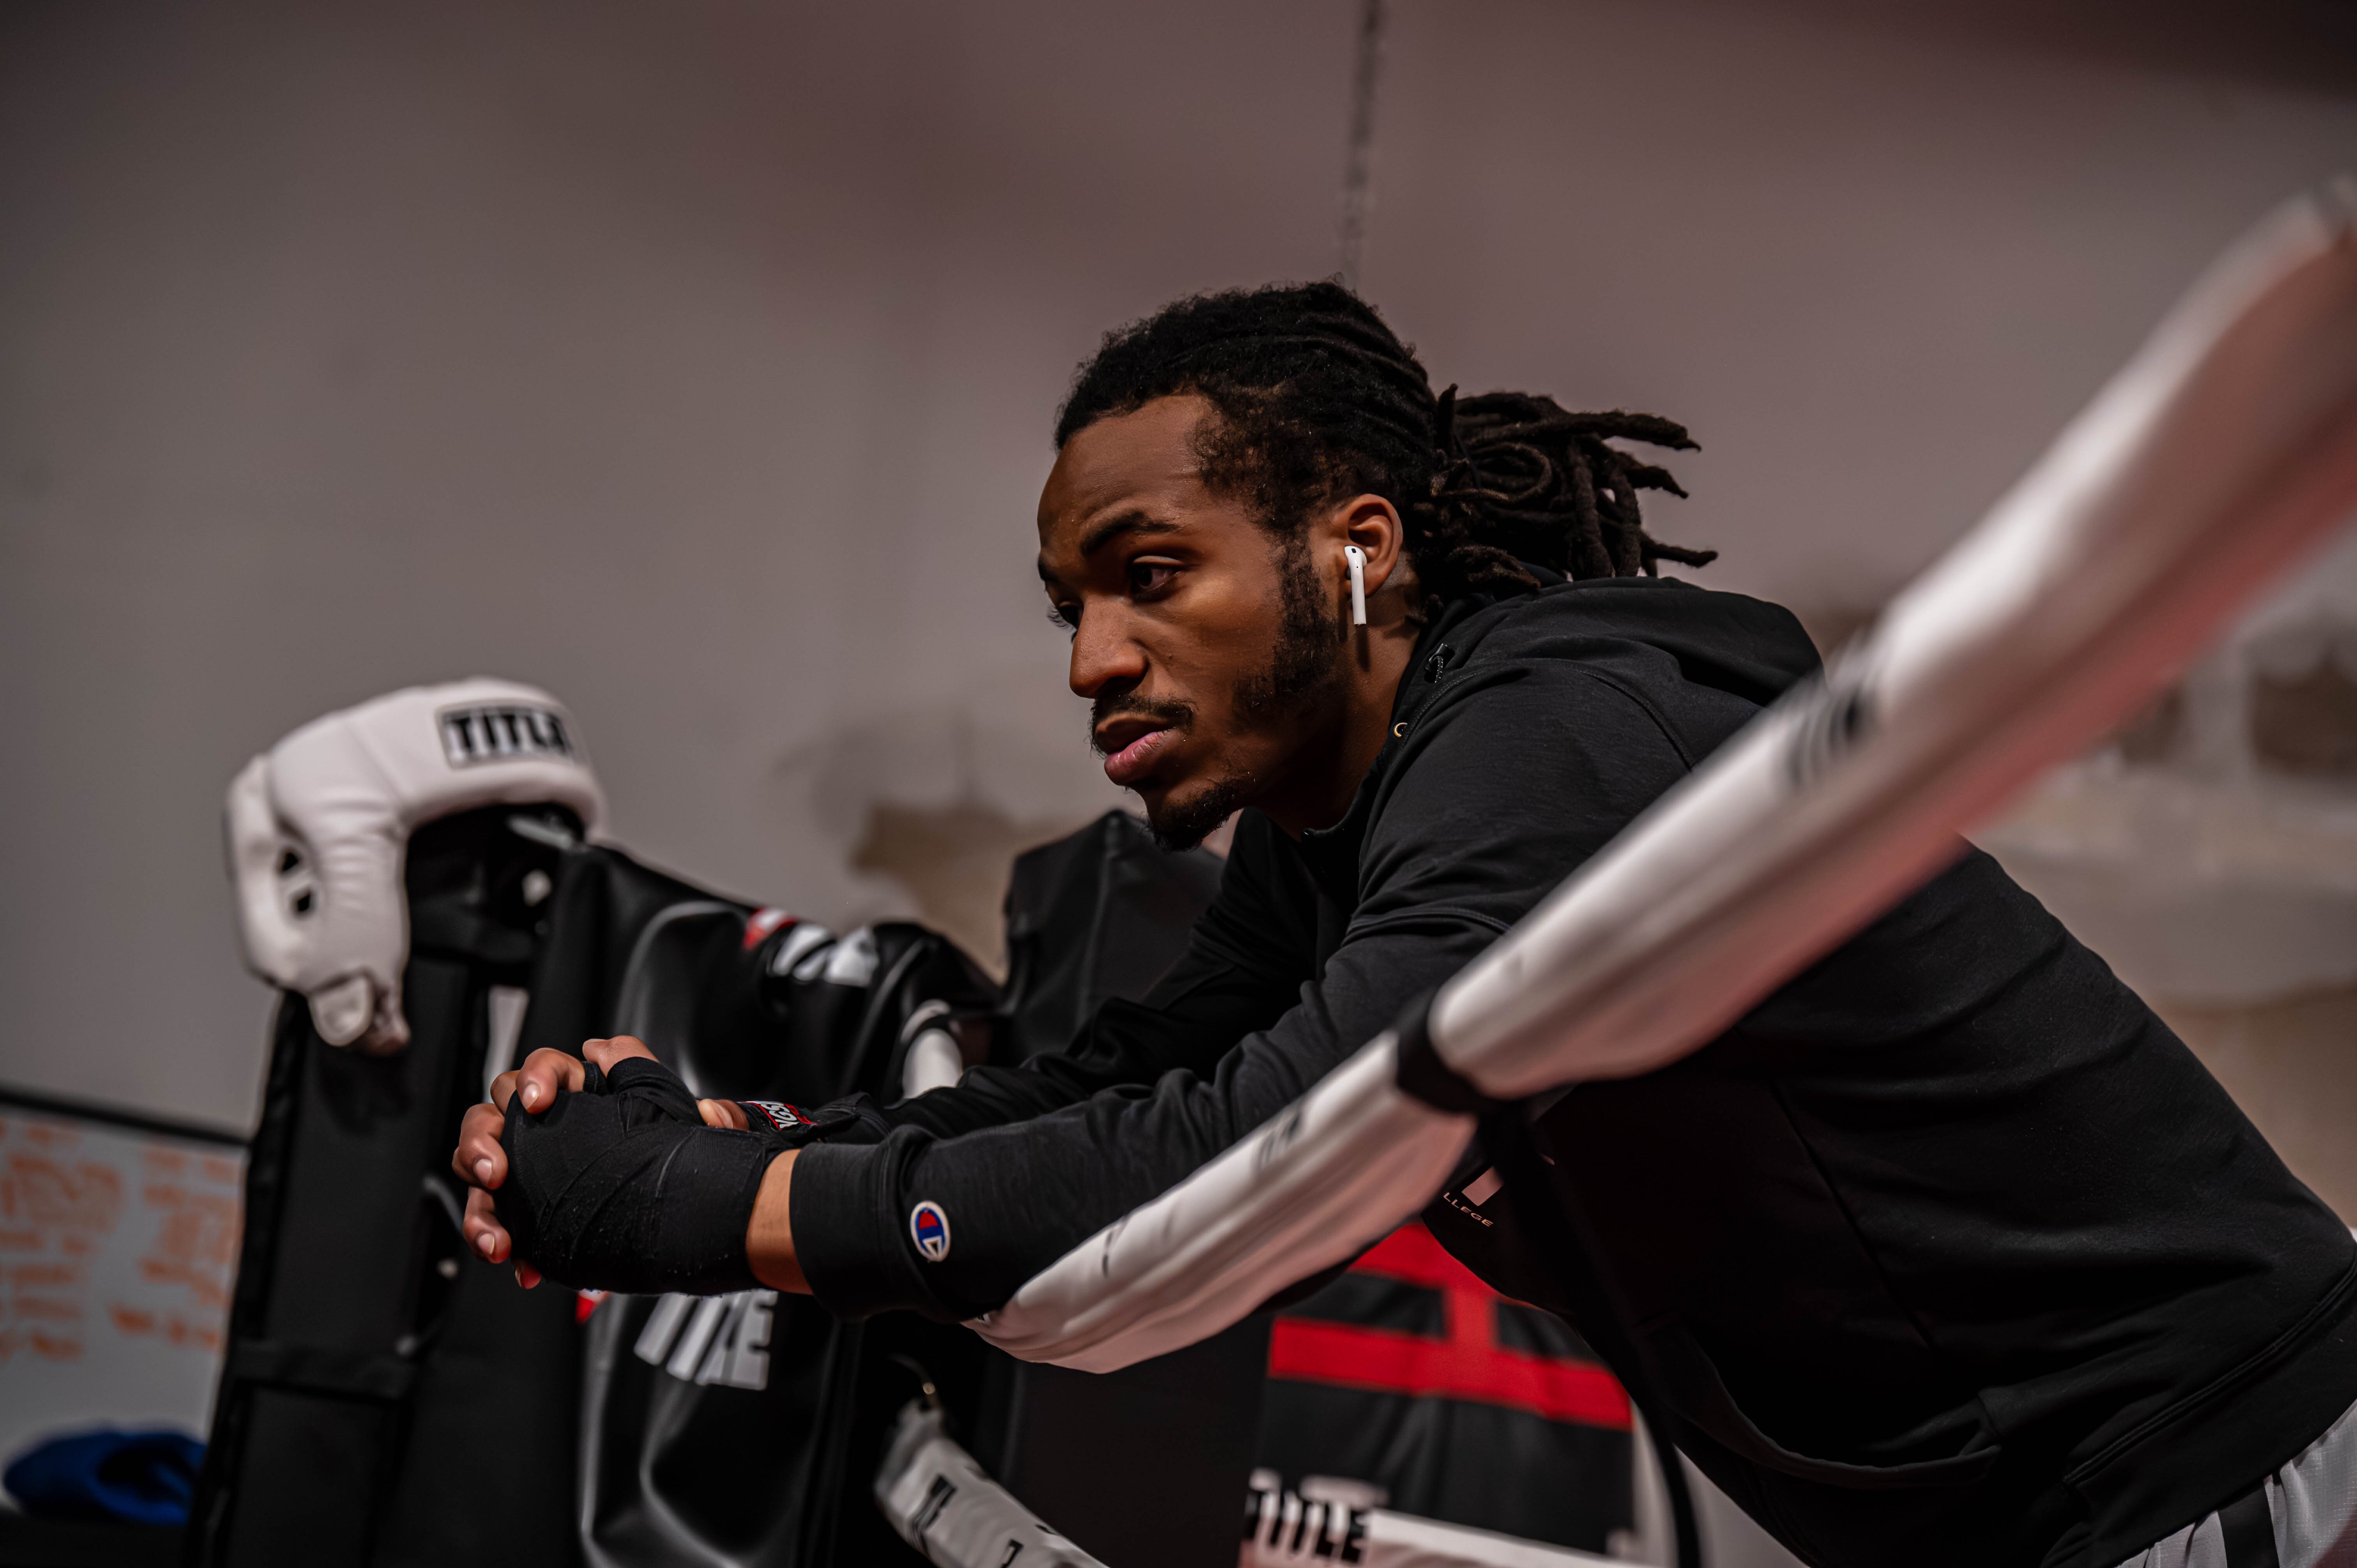 Flint boxer Jaylyn Nichols takes a pause and reflects during his workout before the 'Armageddon in April' fight.